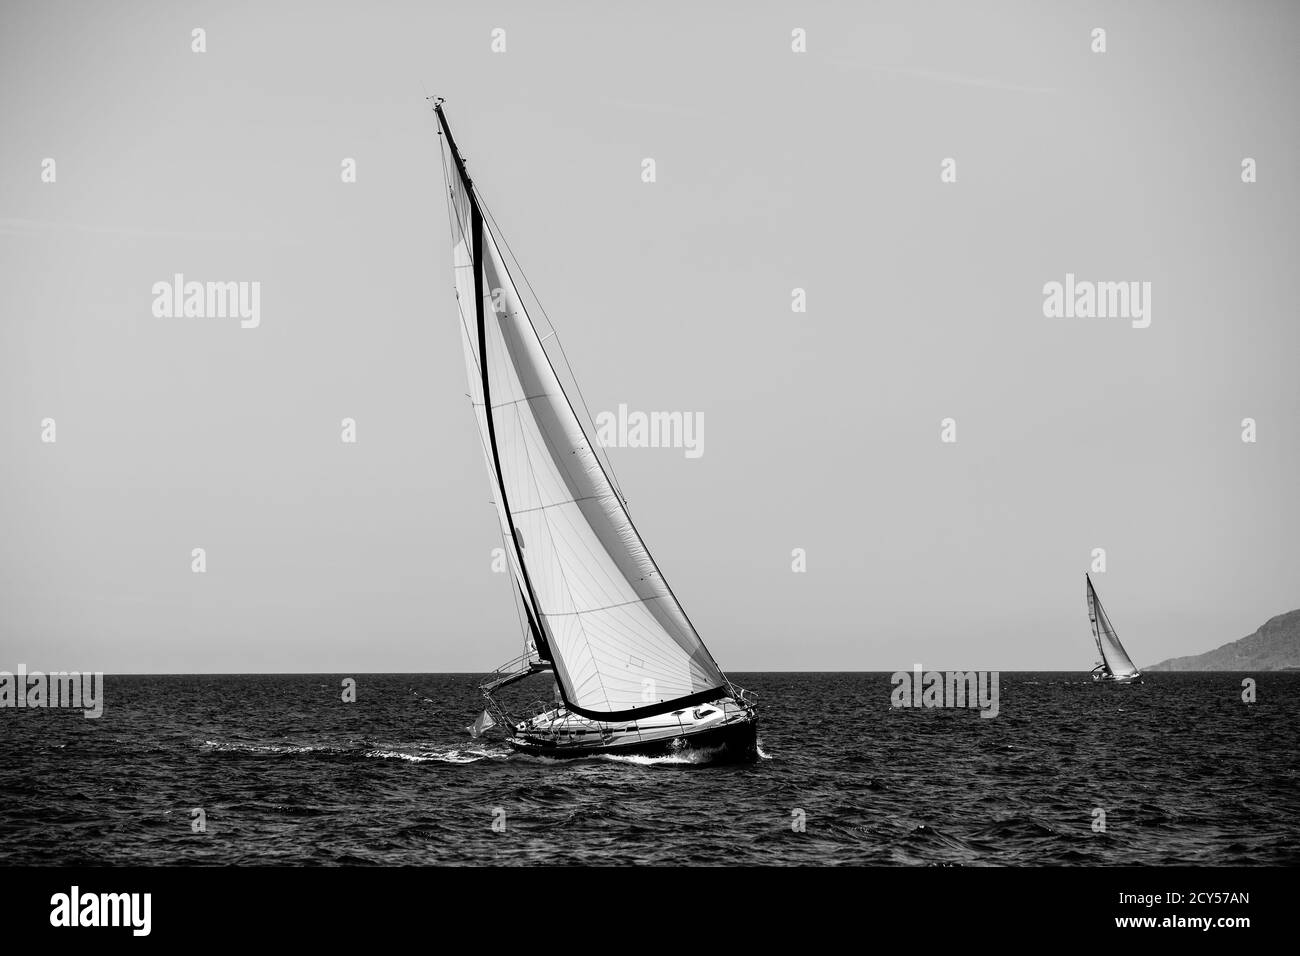 Luxury sailing. Sailboat in the regatta in the Aegean Sea. Black and white photography. Stock Photo